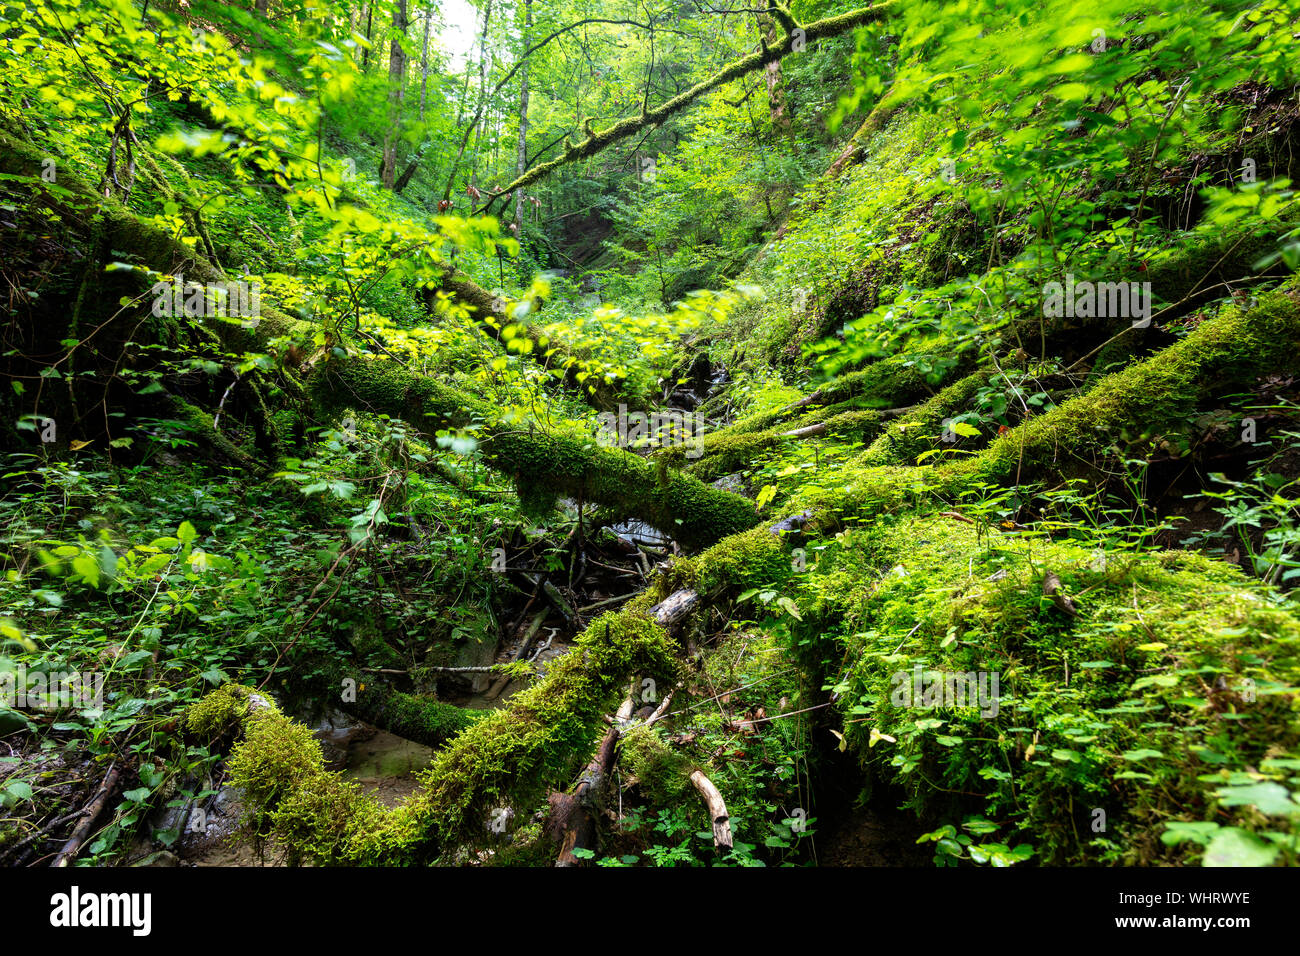 Dead wood in the Wutachschlucht nature reserve, Black Forest, Baden-Wuerttemberg, Germany Stock Photo